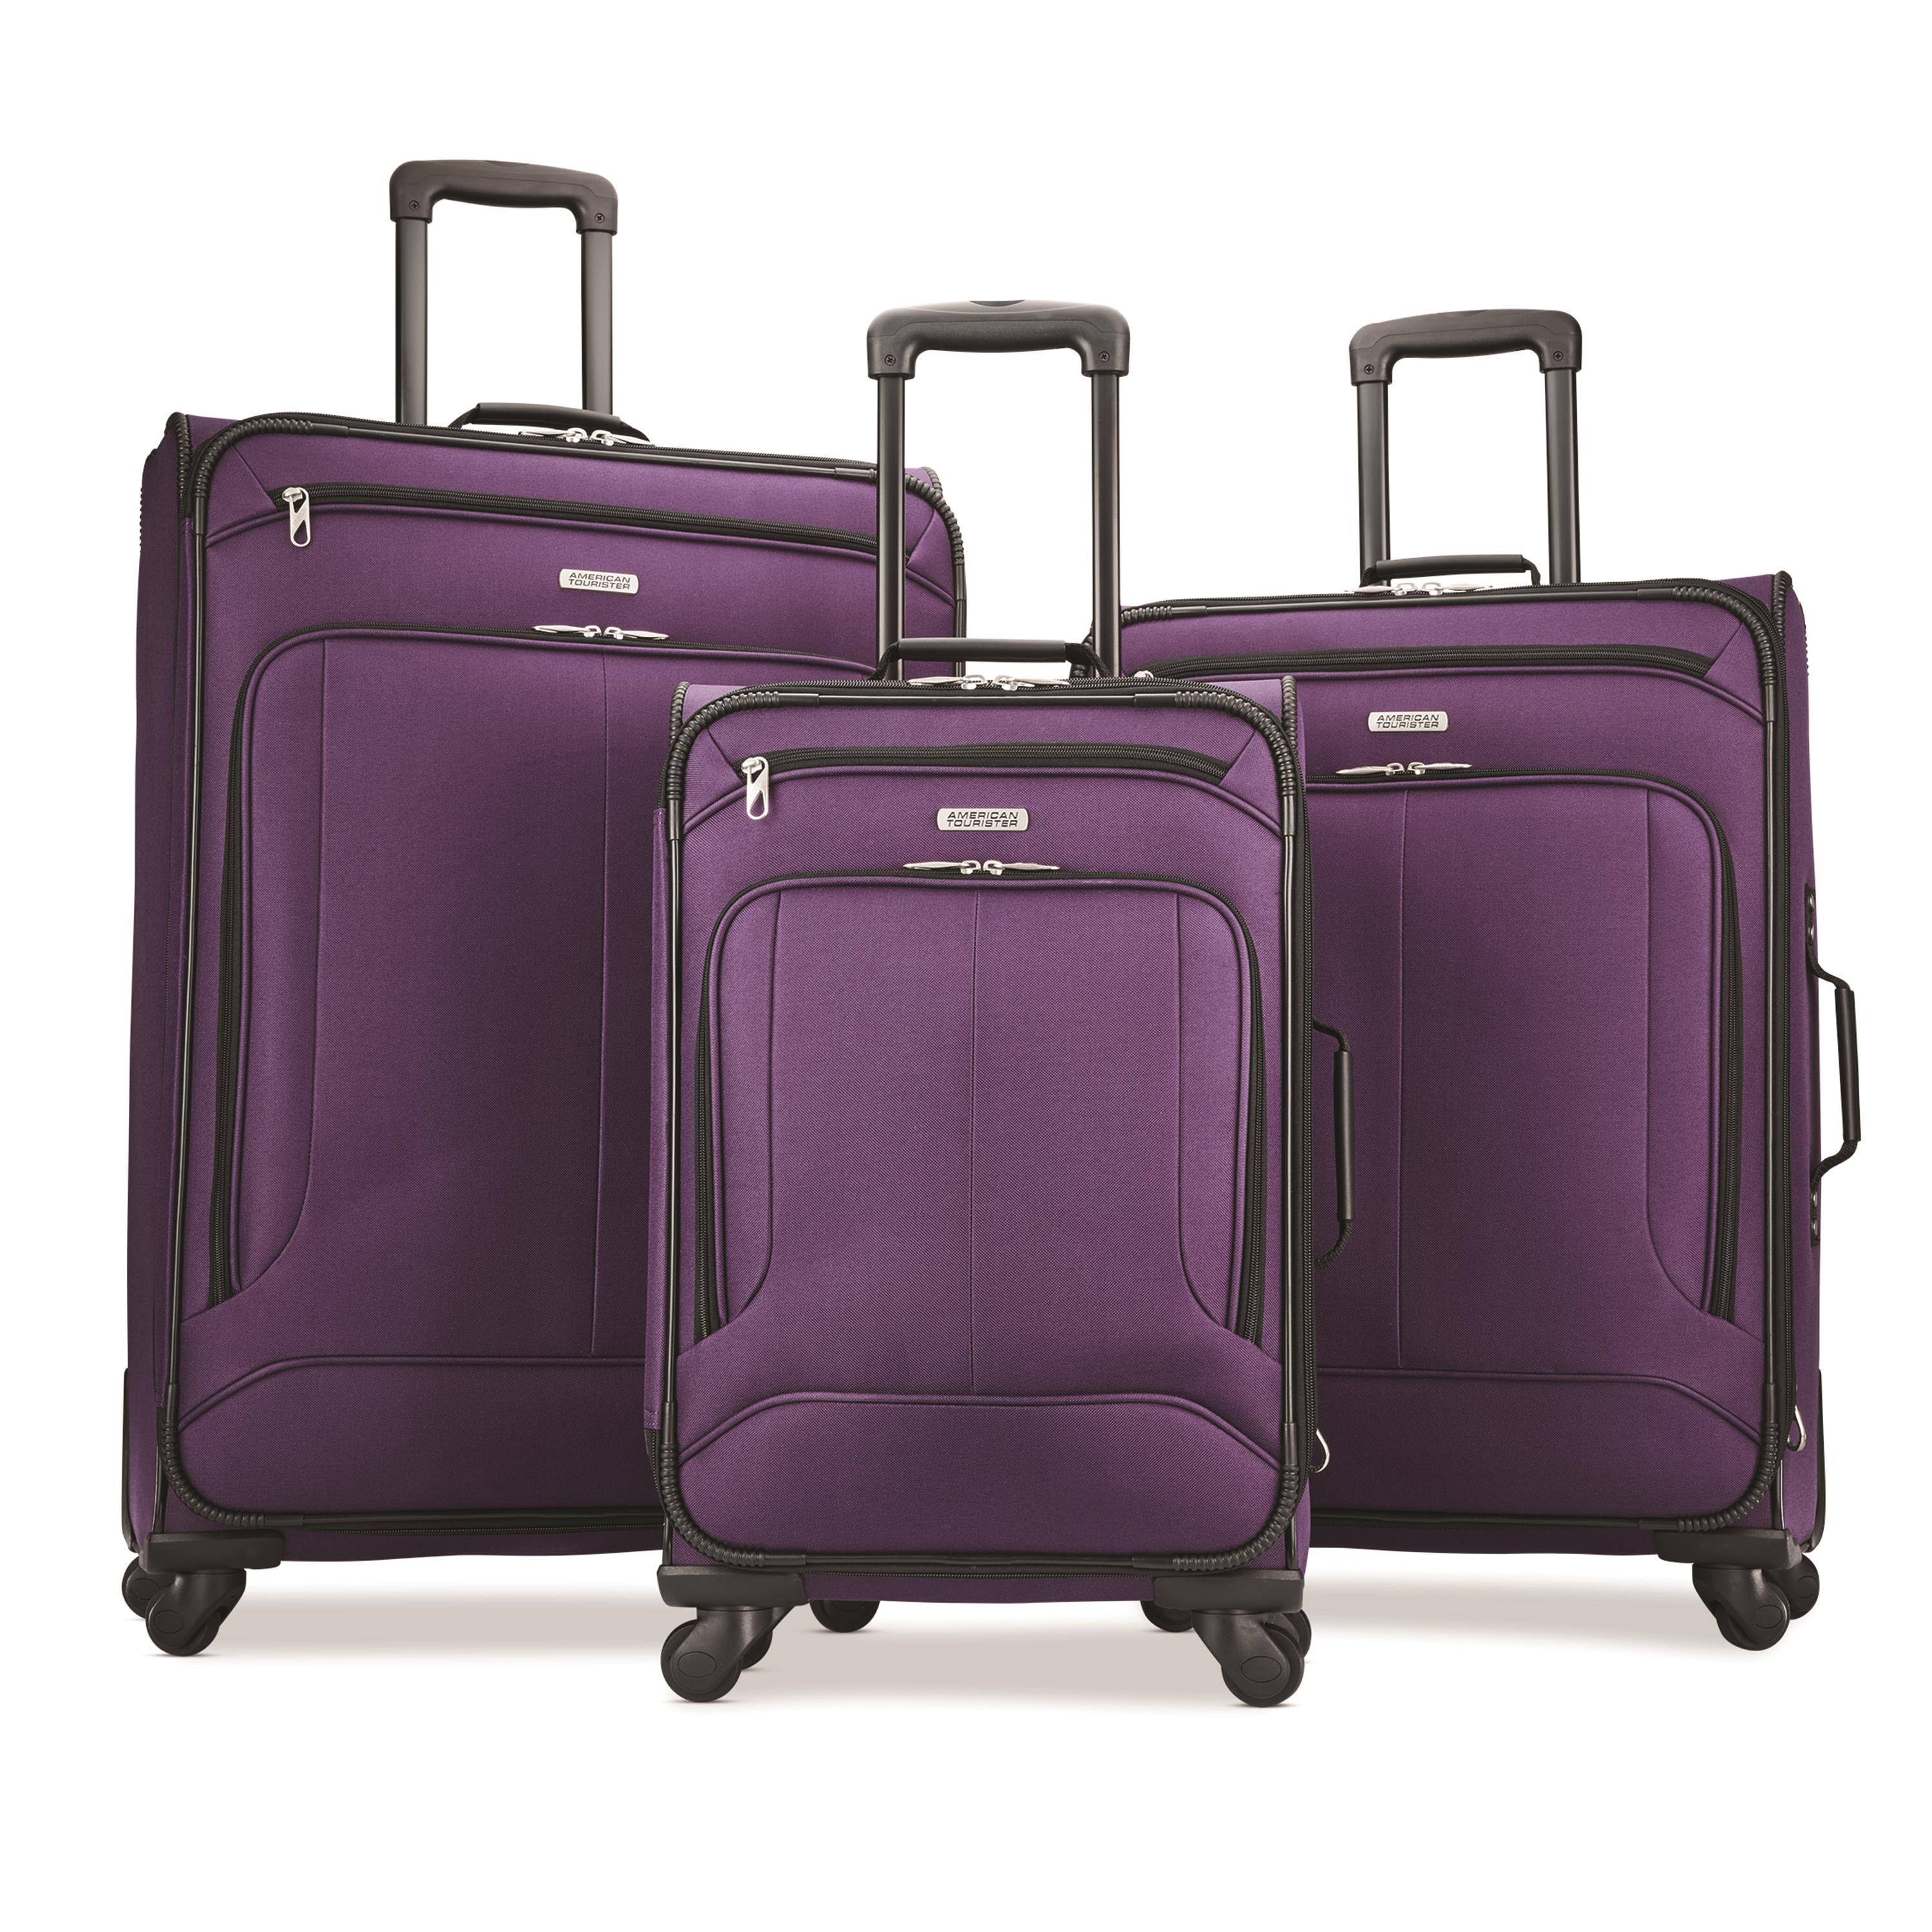 American Tourister Pop Max 3 Piece Spinner Luggage Set Purple - wgl-05